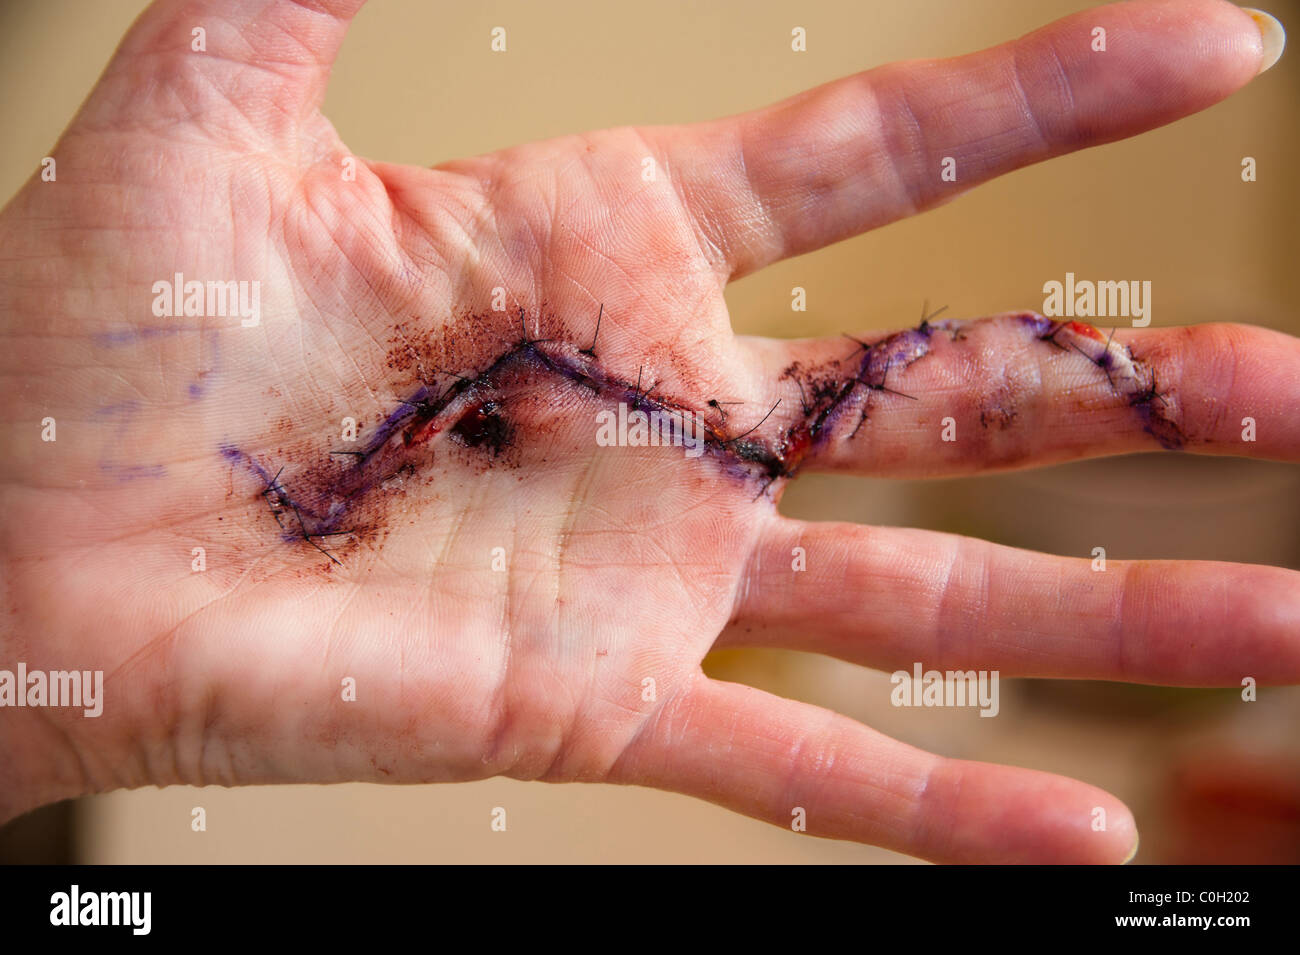 operation-scars-for-dupuytrens-contracture-C0H202.jpg